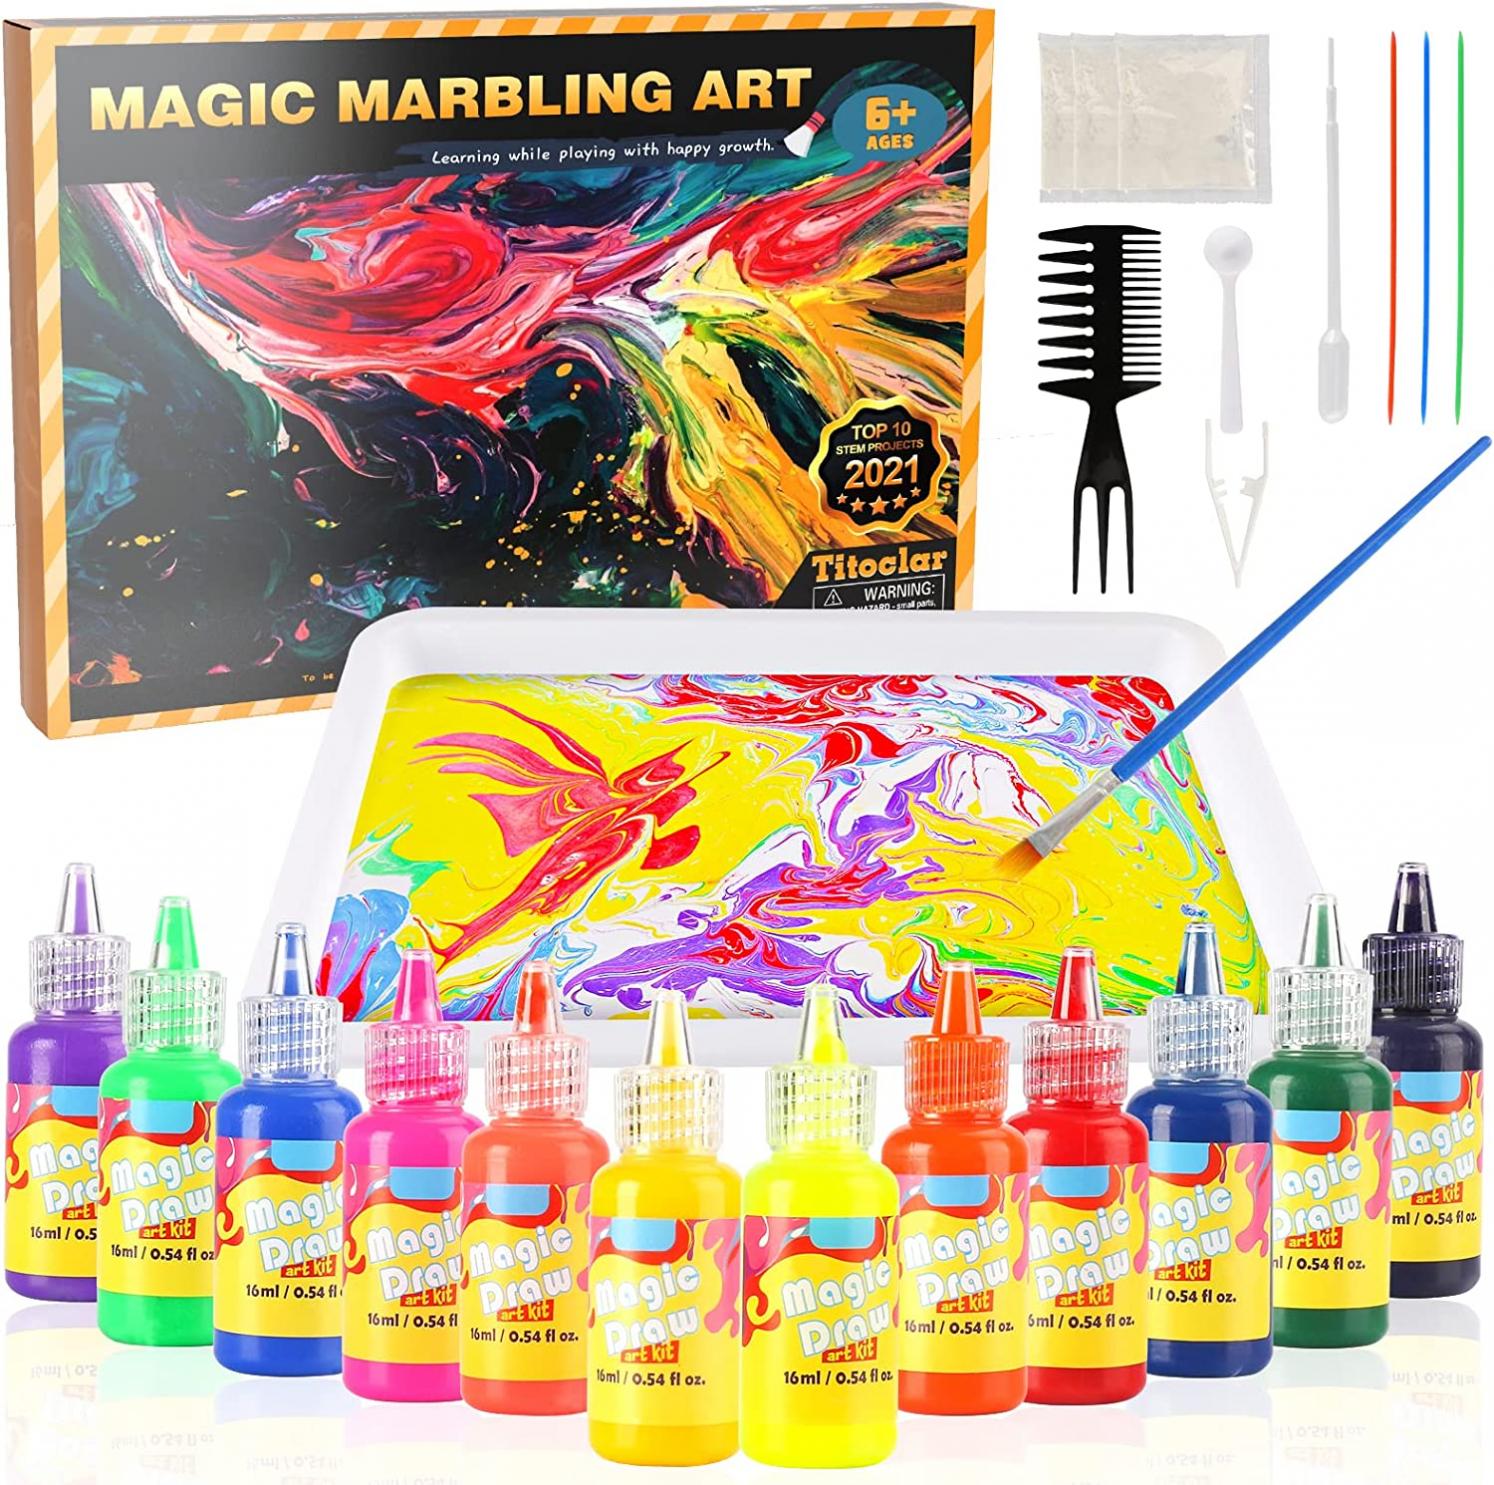 Arts & Crafts For Kids Ages 8-12, Water Marbling Paint Kit, Kids Christmas Gifts, Toys For Girls Boys 4 5 6 7 8 9 10 11 12 Year Old